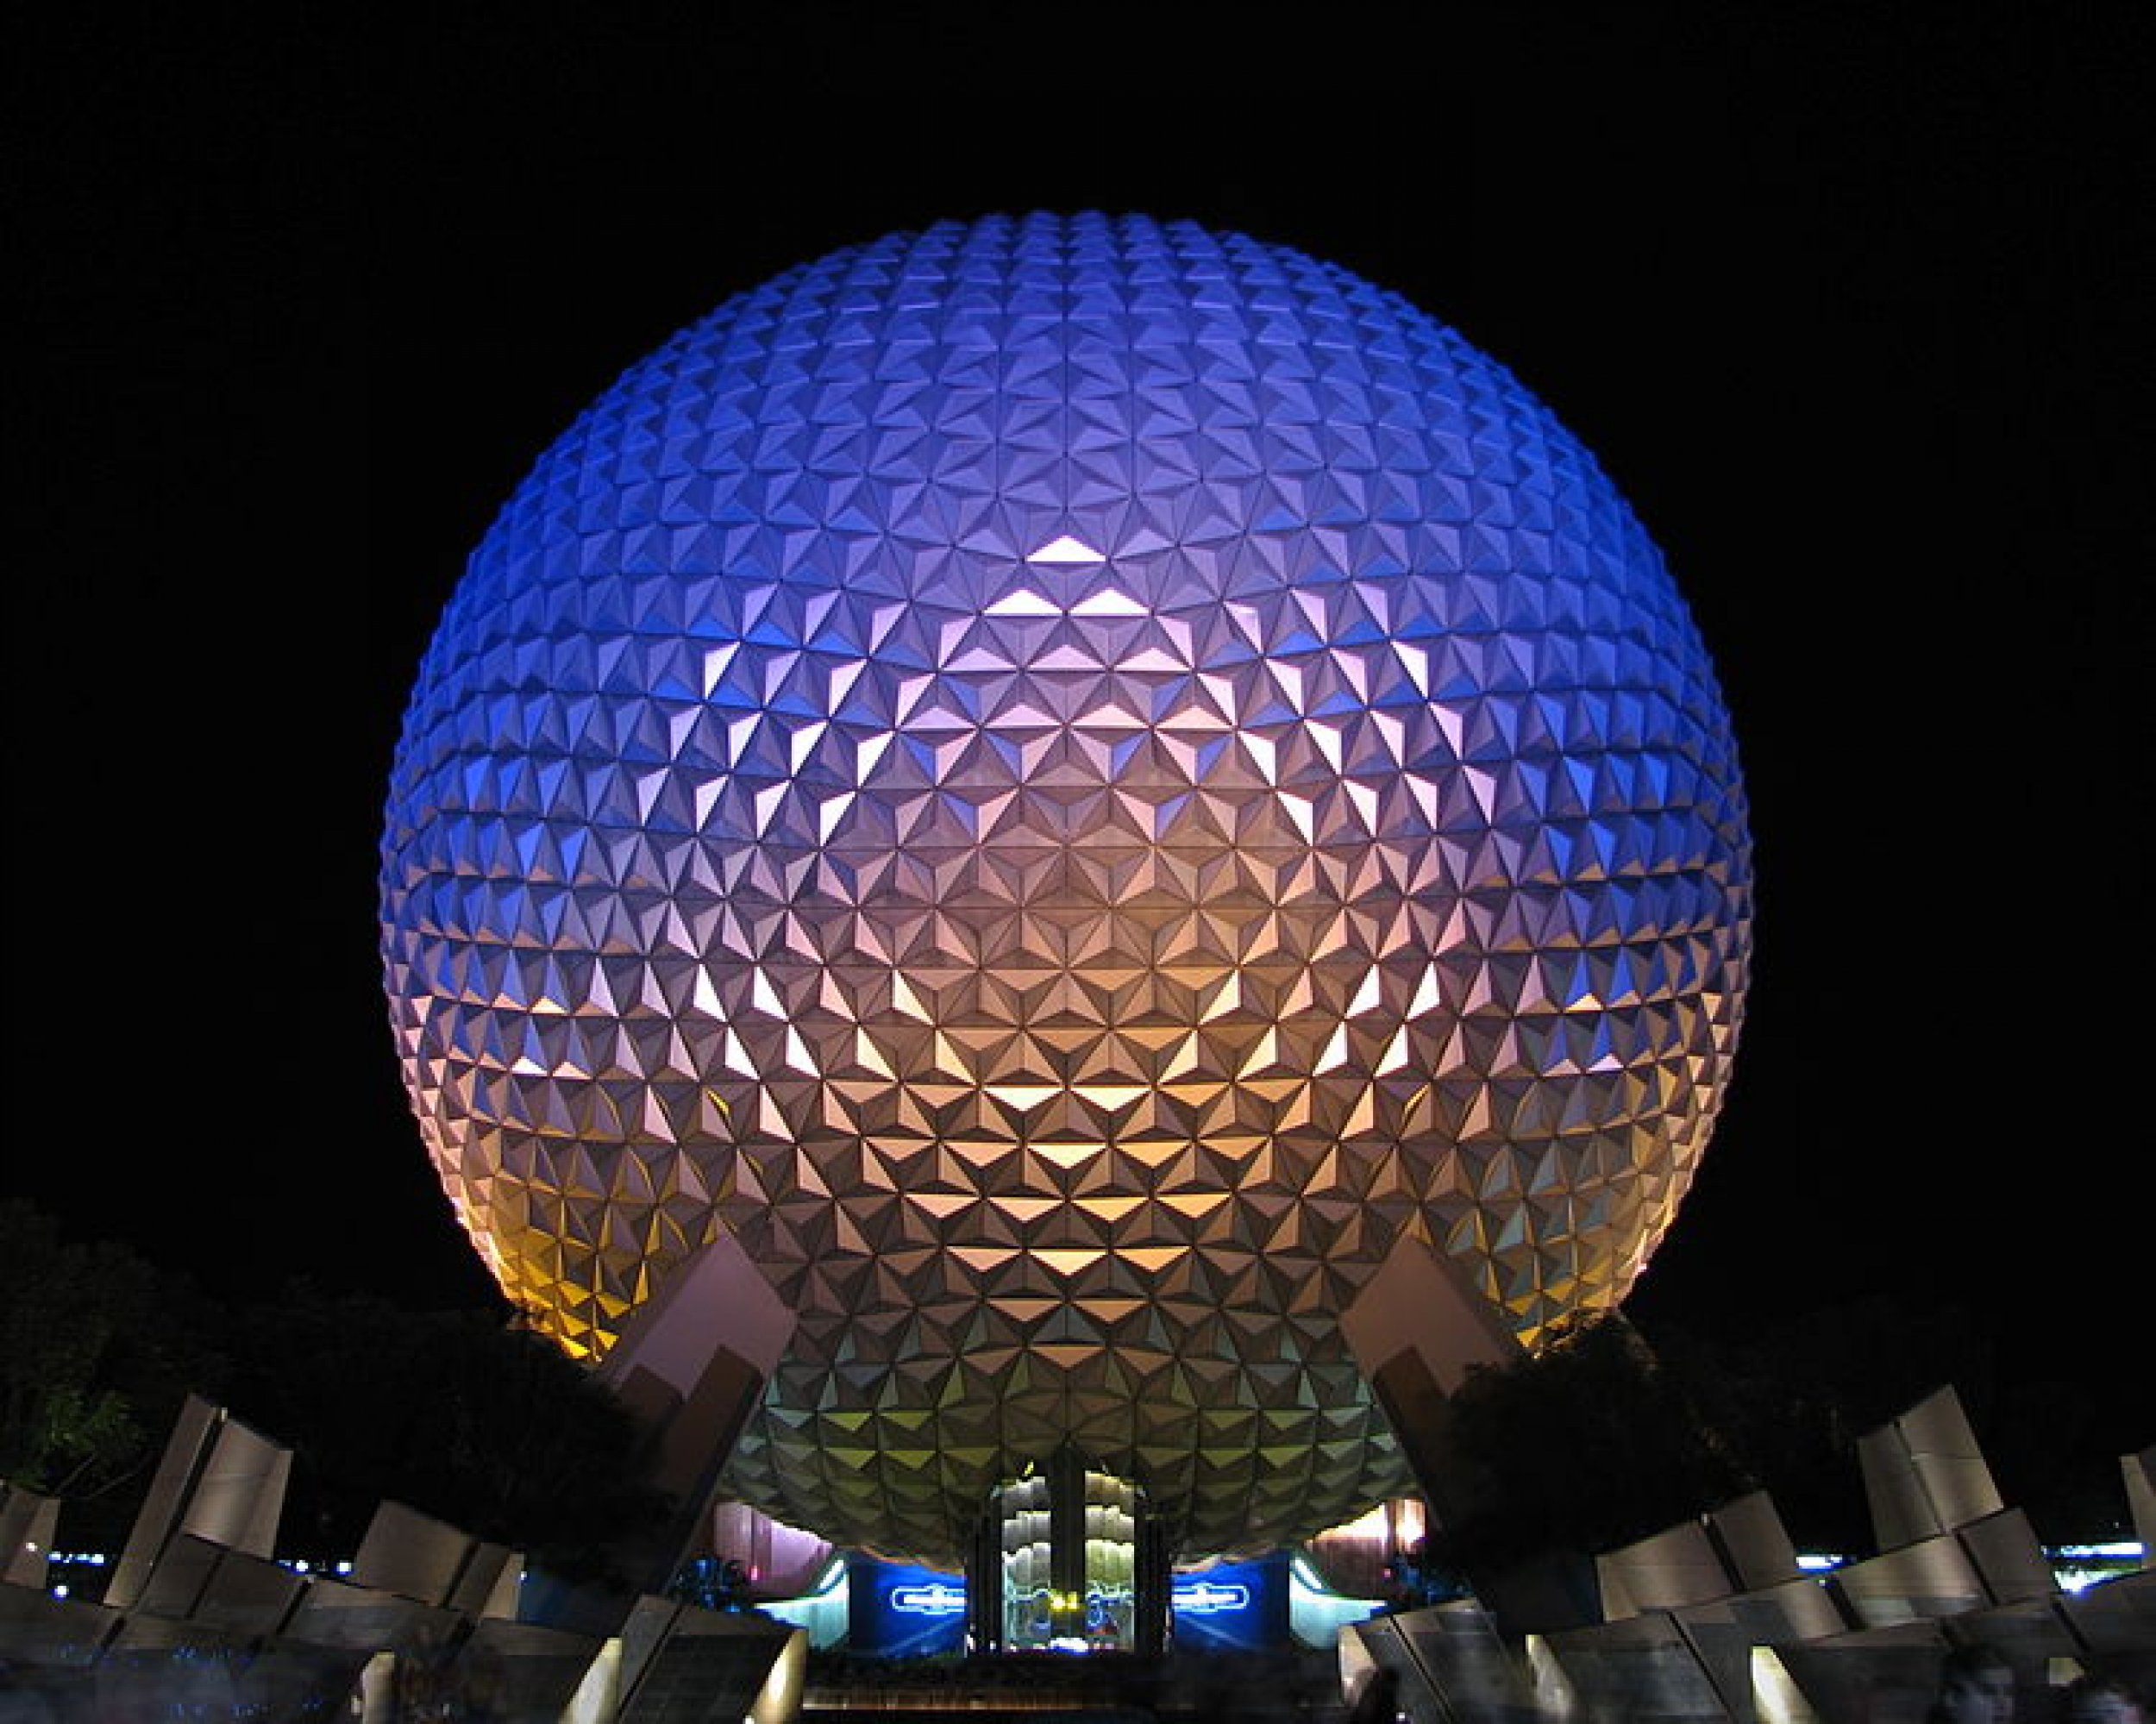 30 Year Anniversary Of Epcot, The Experimental Prototype Community Of Tomorrow